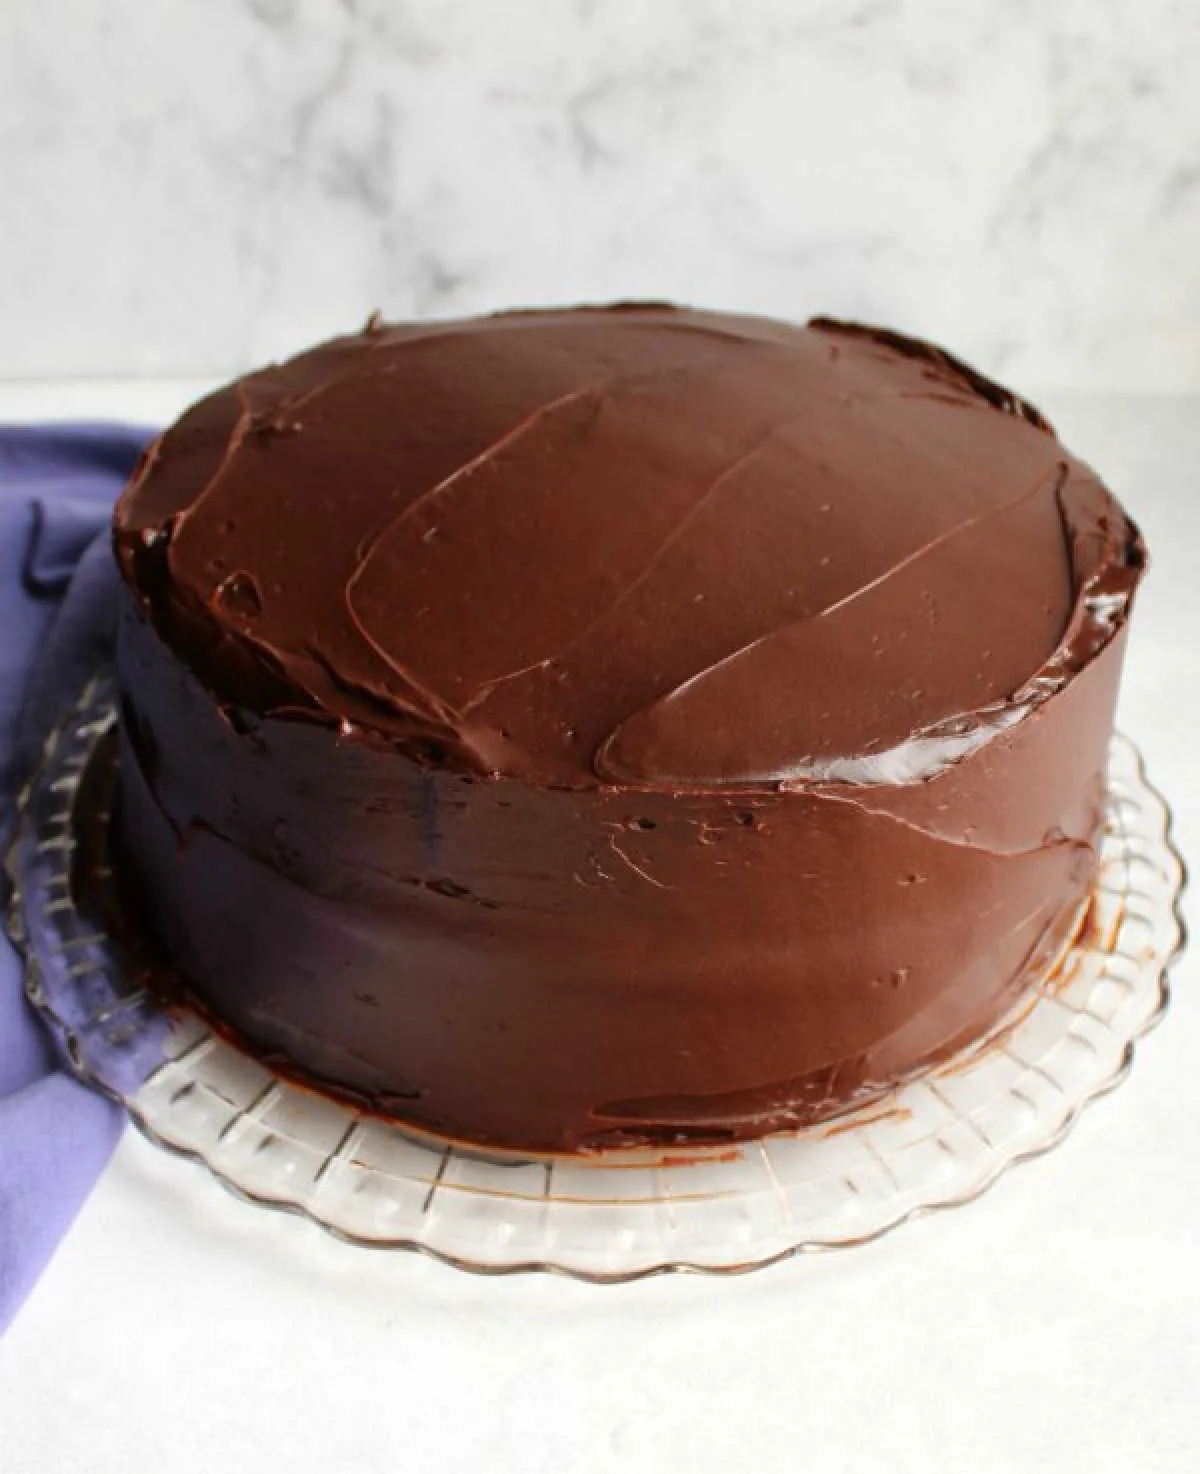 cake frosted with smooth glossy chocolate frosting.